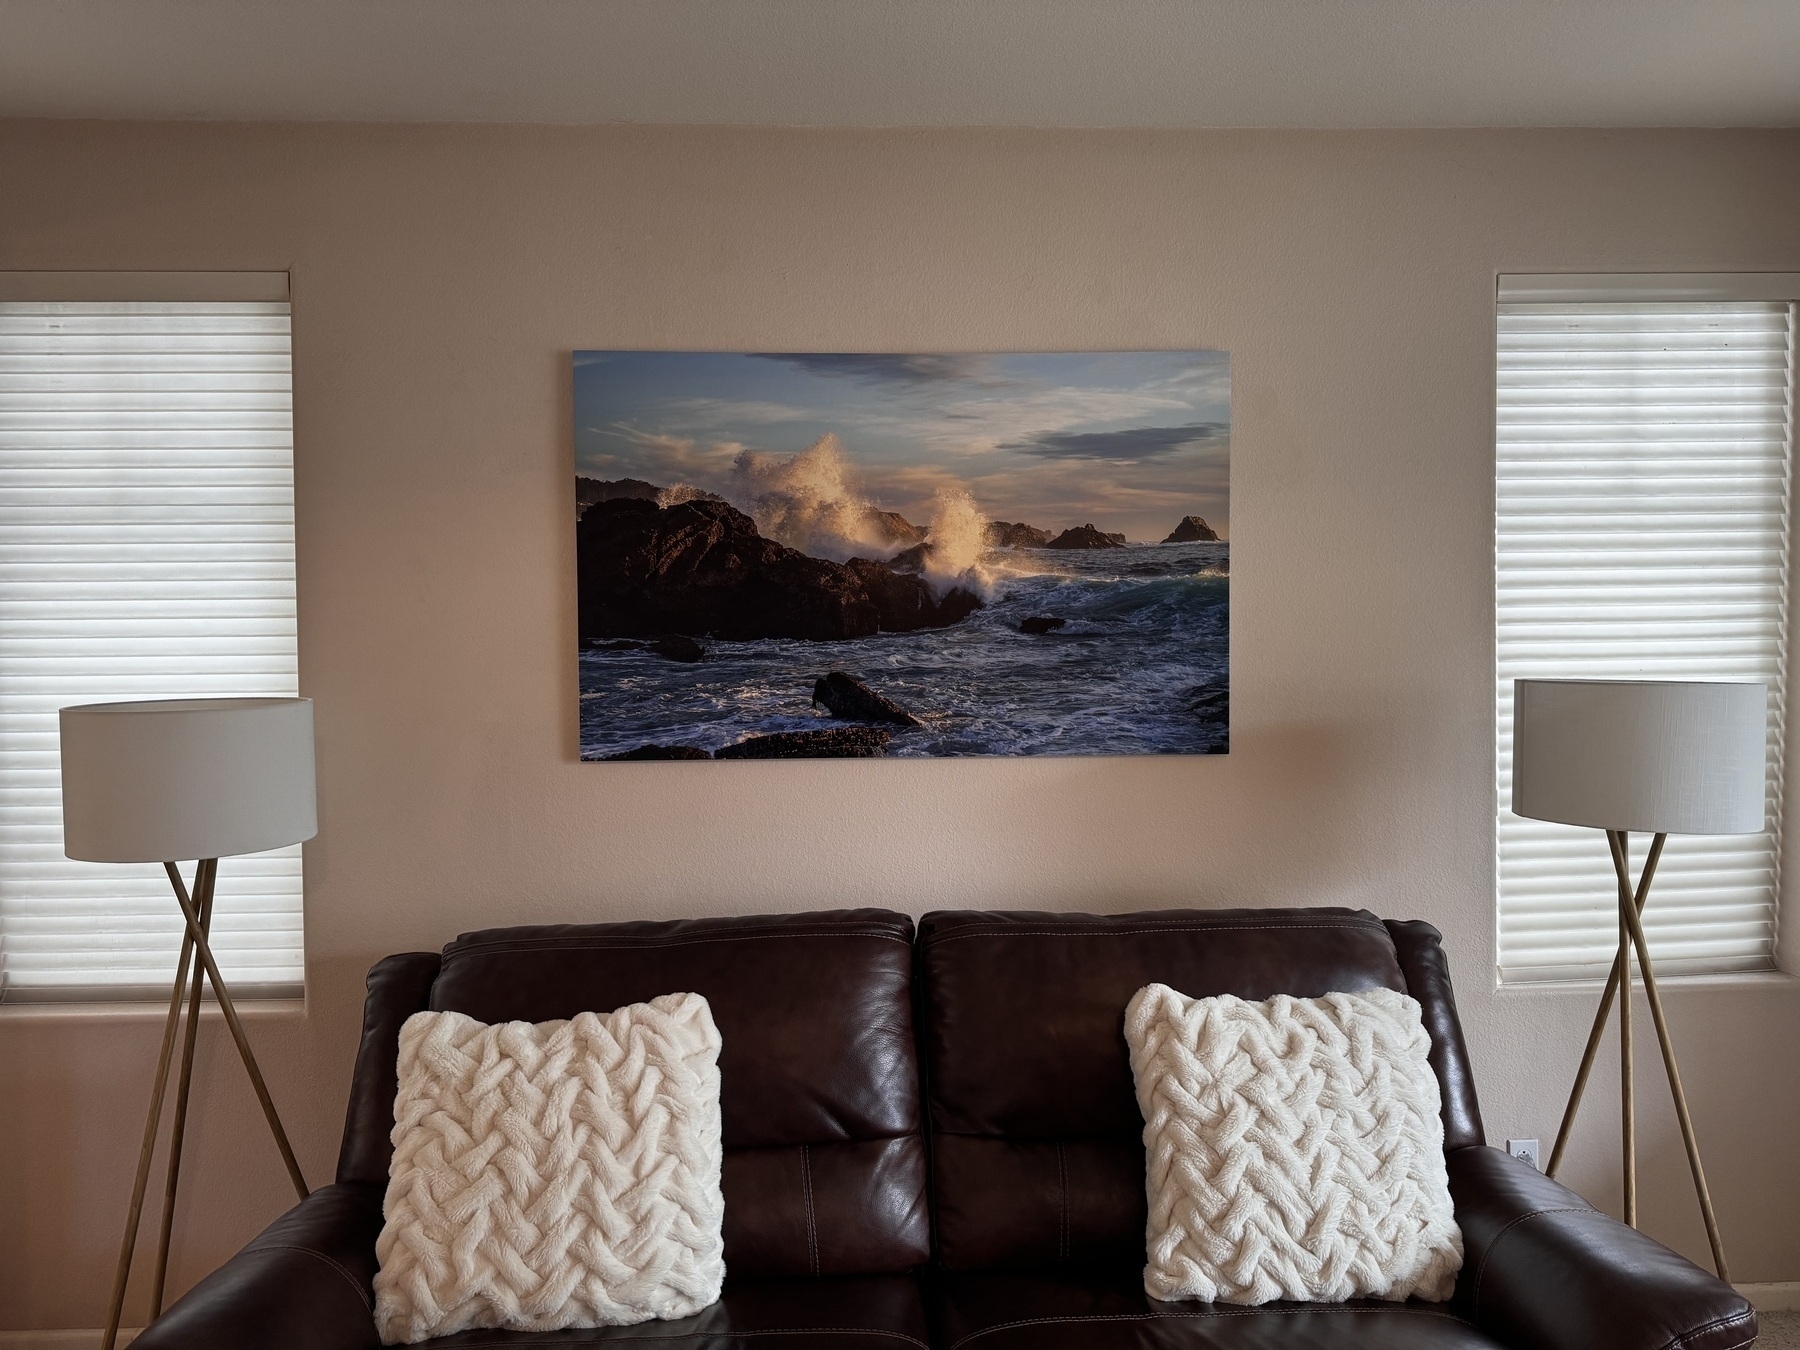 Photo of a living room, with a couch, two lamps, and a large photograph of a wave crashing onto rocks mounted onto the wall behind the couch.